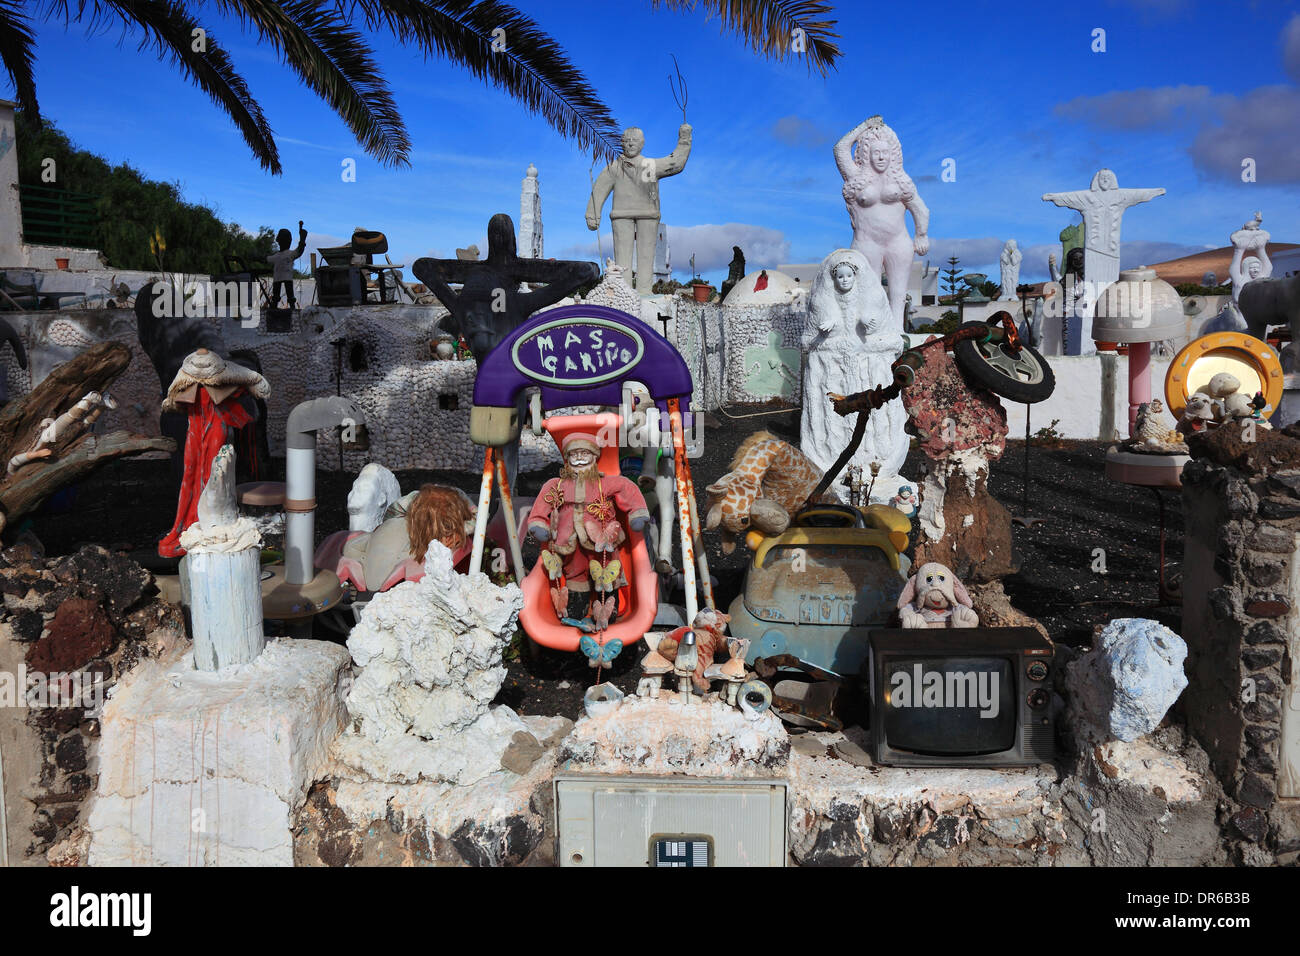 Kitsch and clutter shop, art, crafts, flea market, Teguise, Lanzarote, Canary islands, canaries, spain Stock Photo